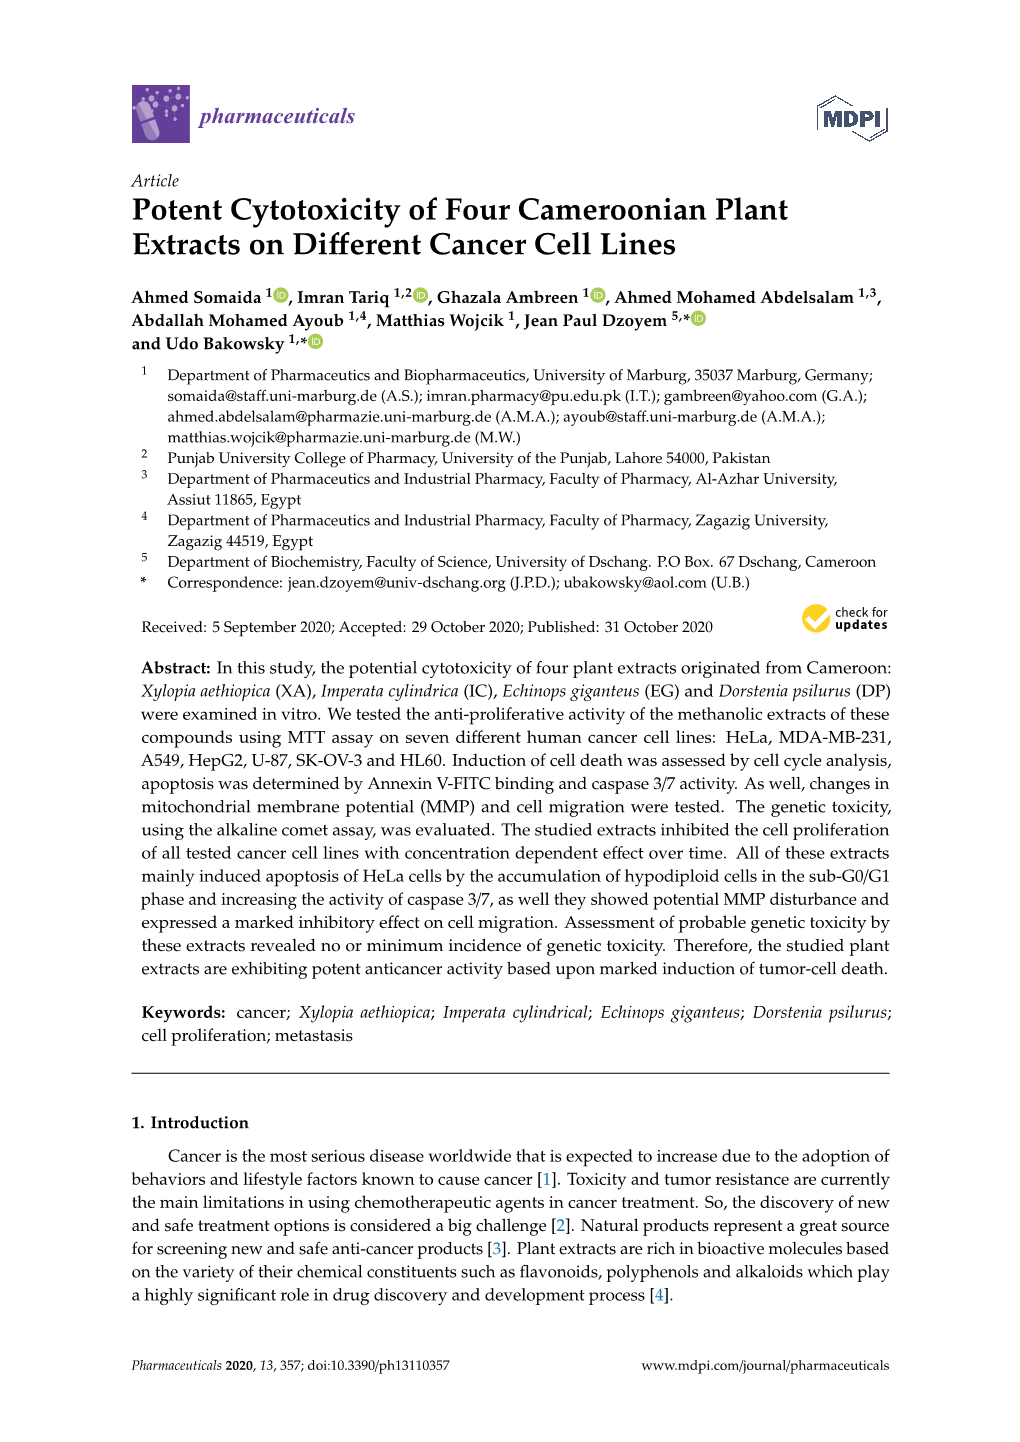 Potent Cytotoxicity of Four Cameroonian Plant Extracts on Different Cancer Cell Lines